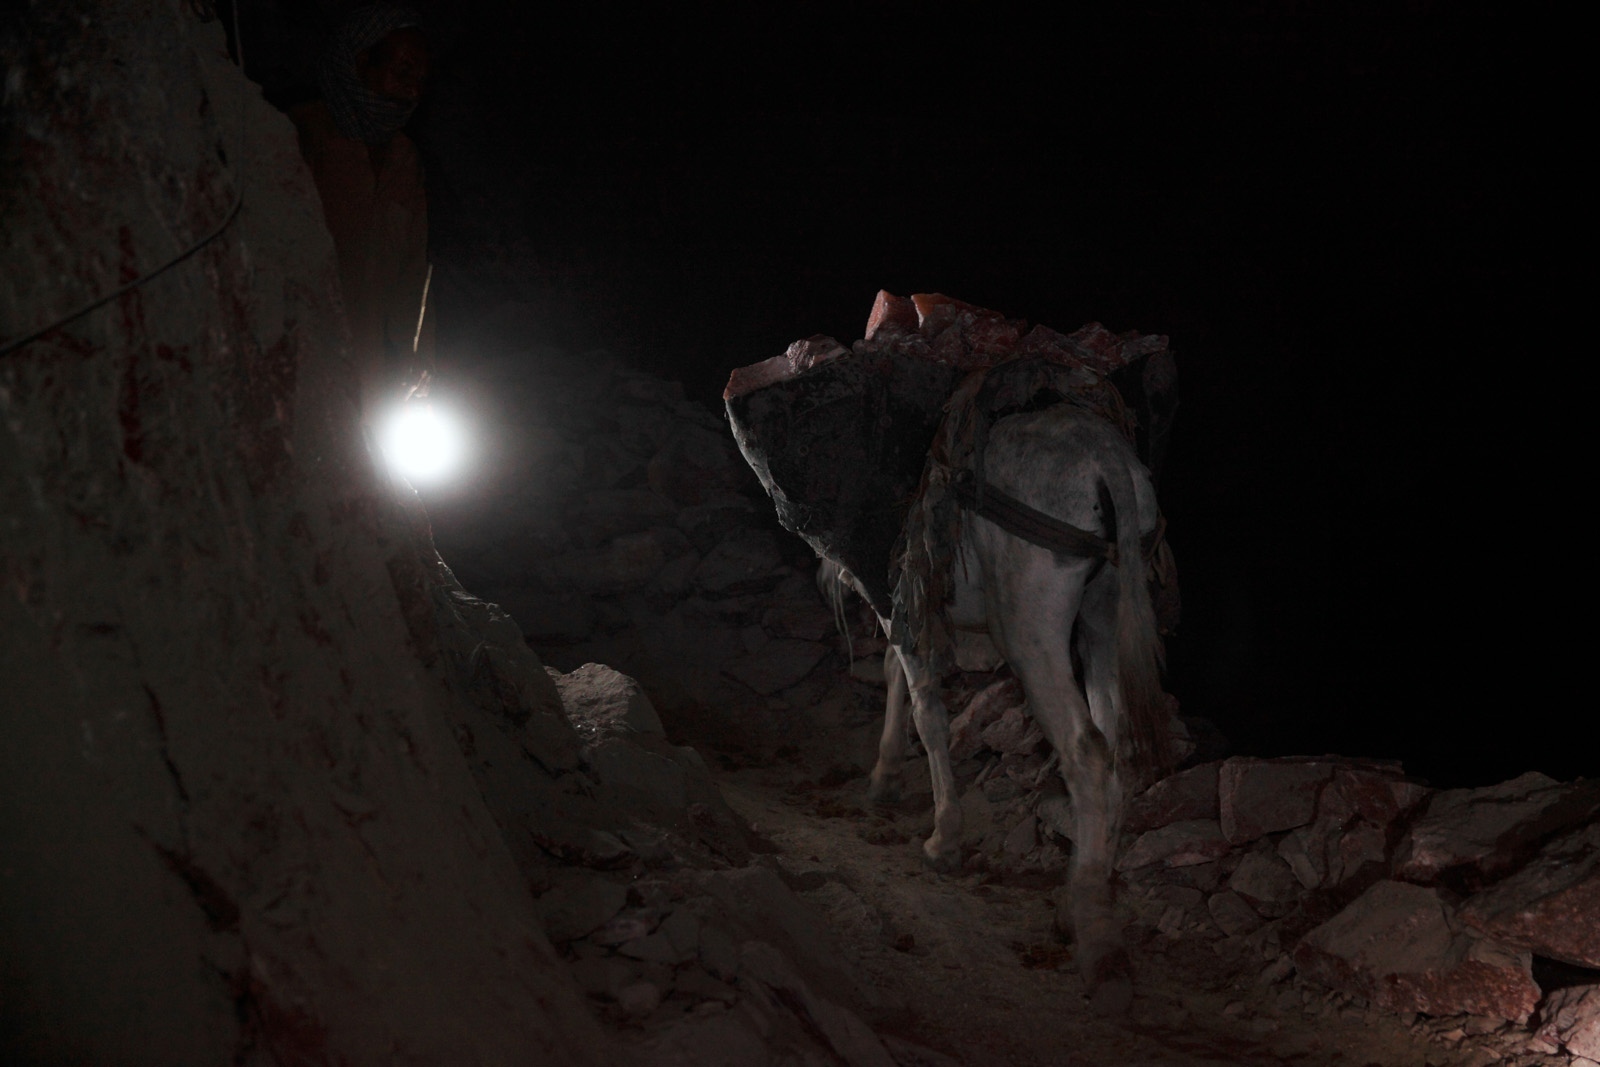 PAKISTAN'S SALT MINES - Throughout the night donkeys are still used at the remote...